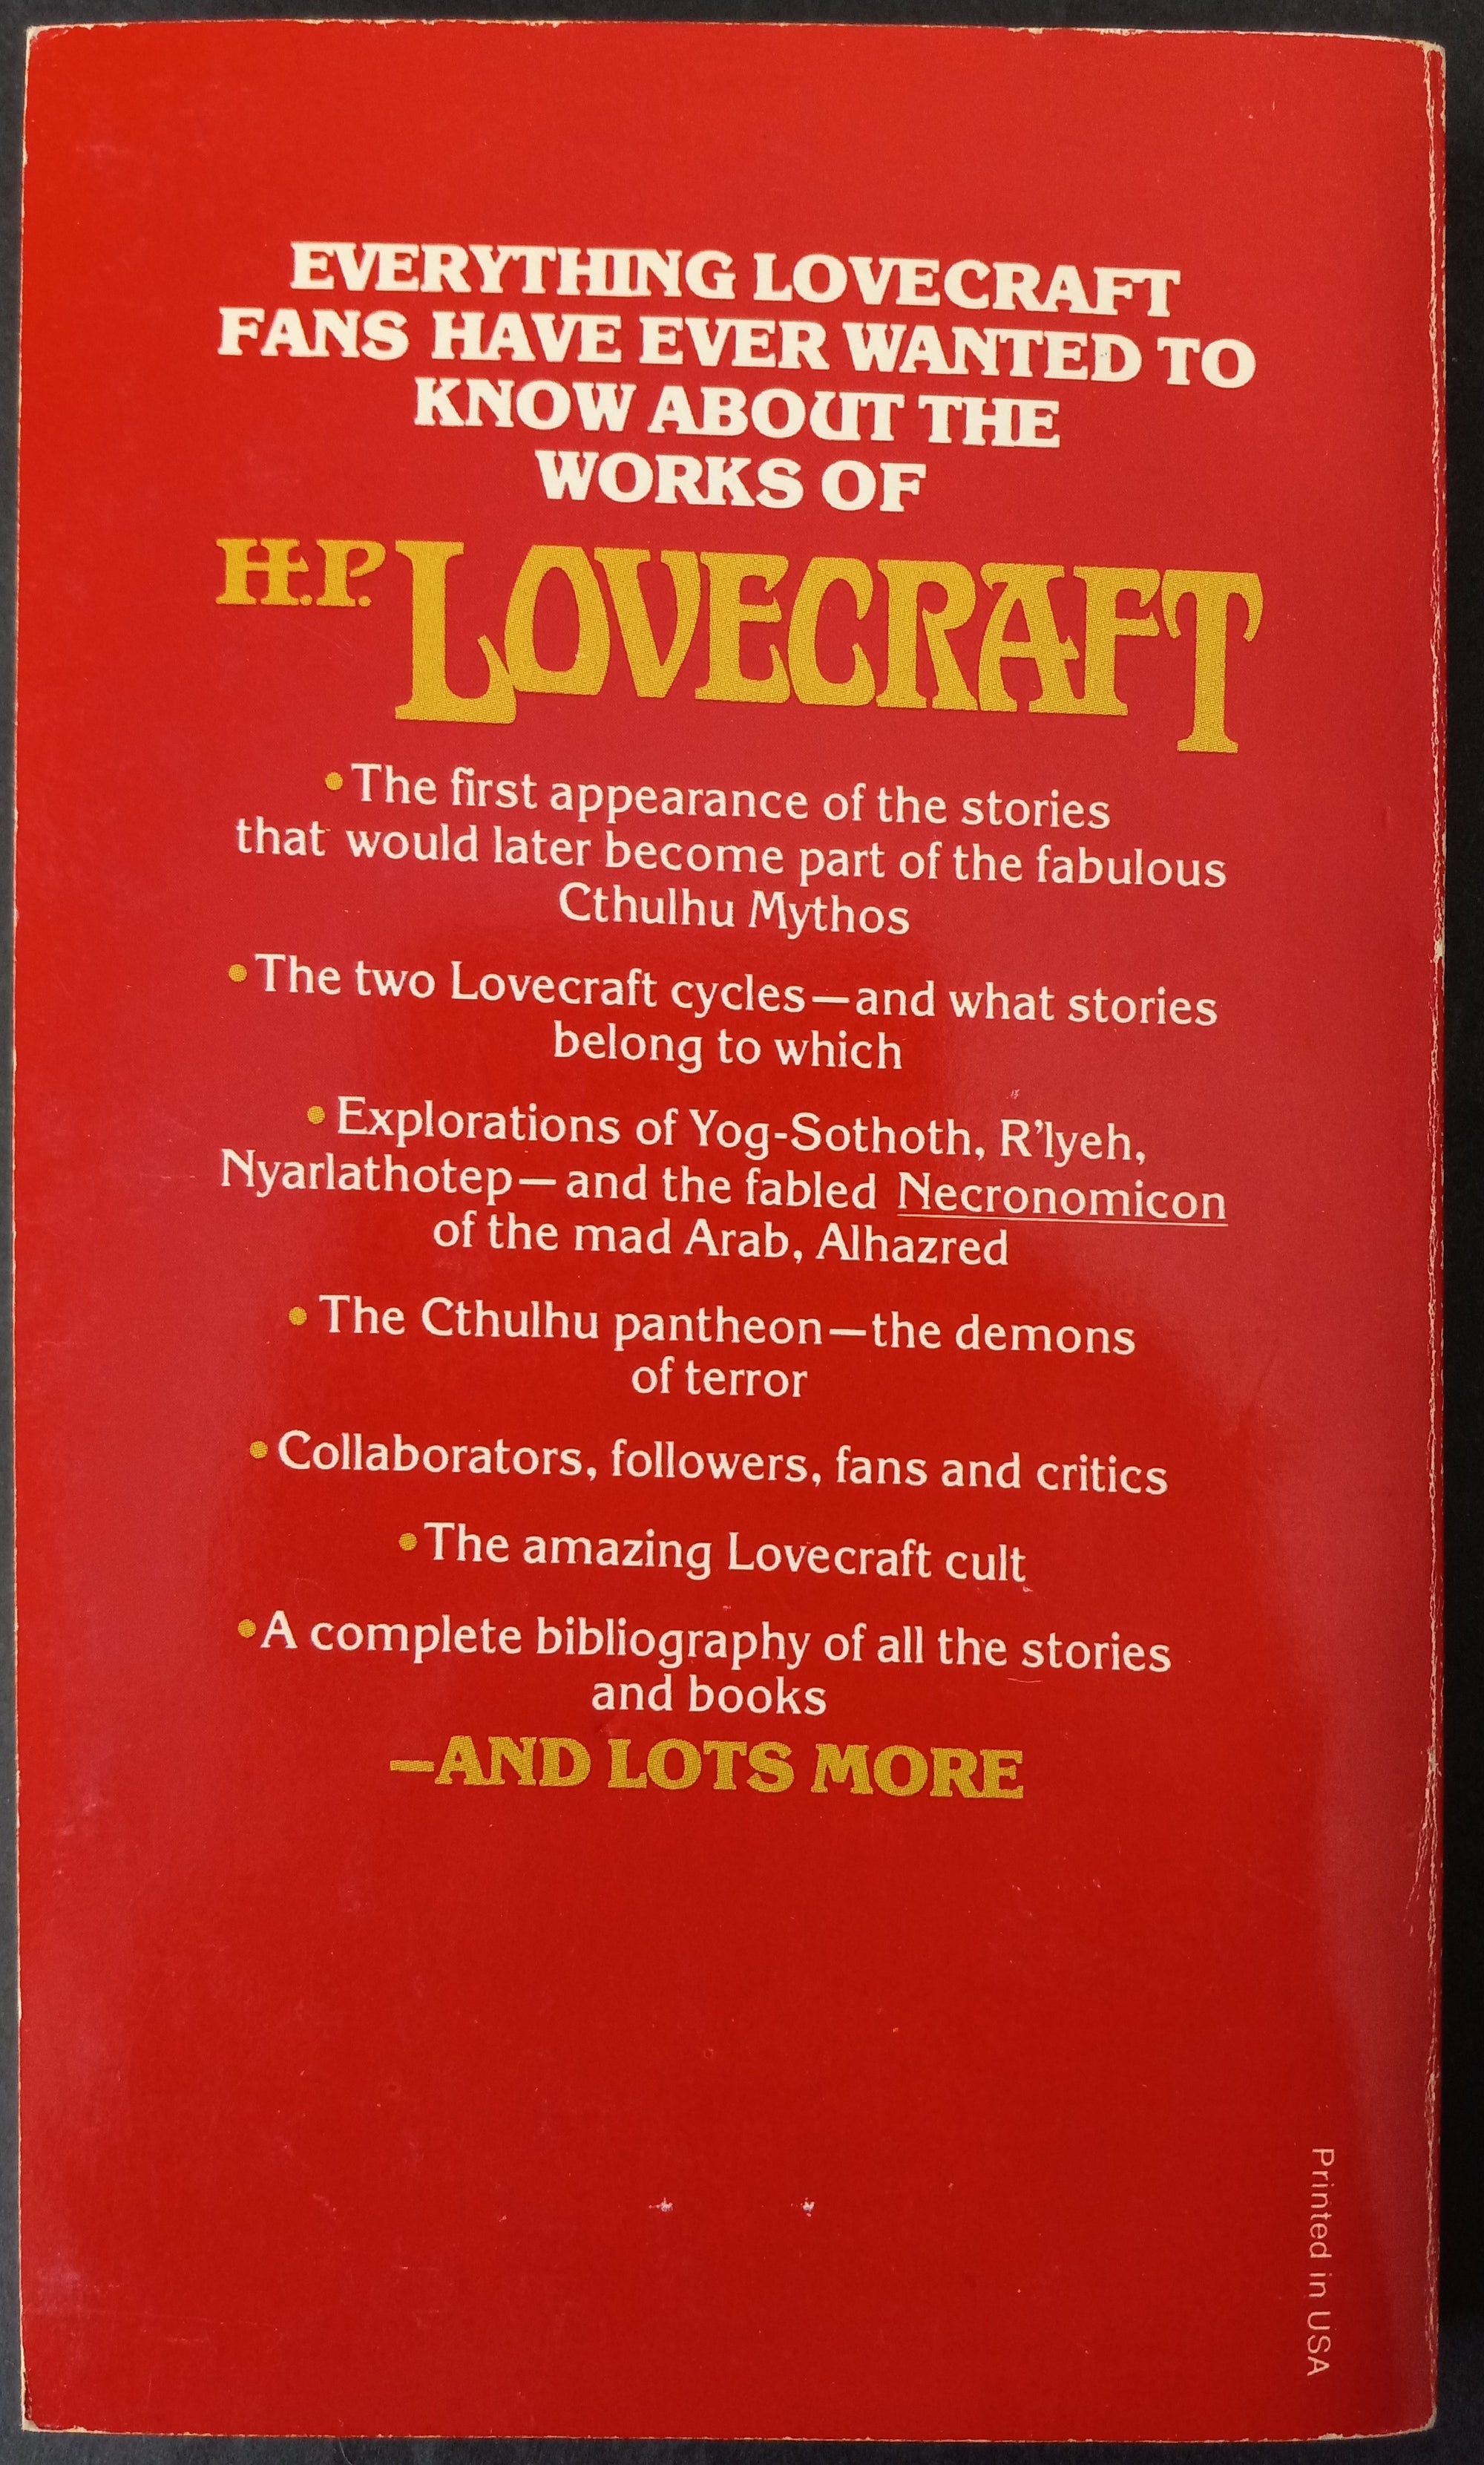 Lovecraft-Behind-the-Mythos-Carter